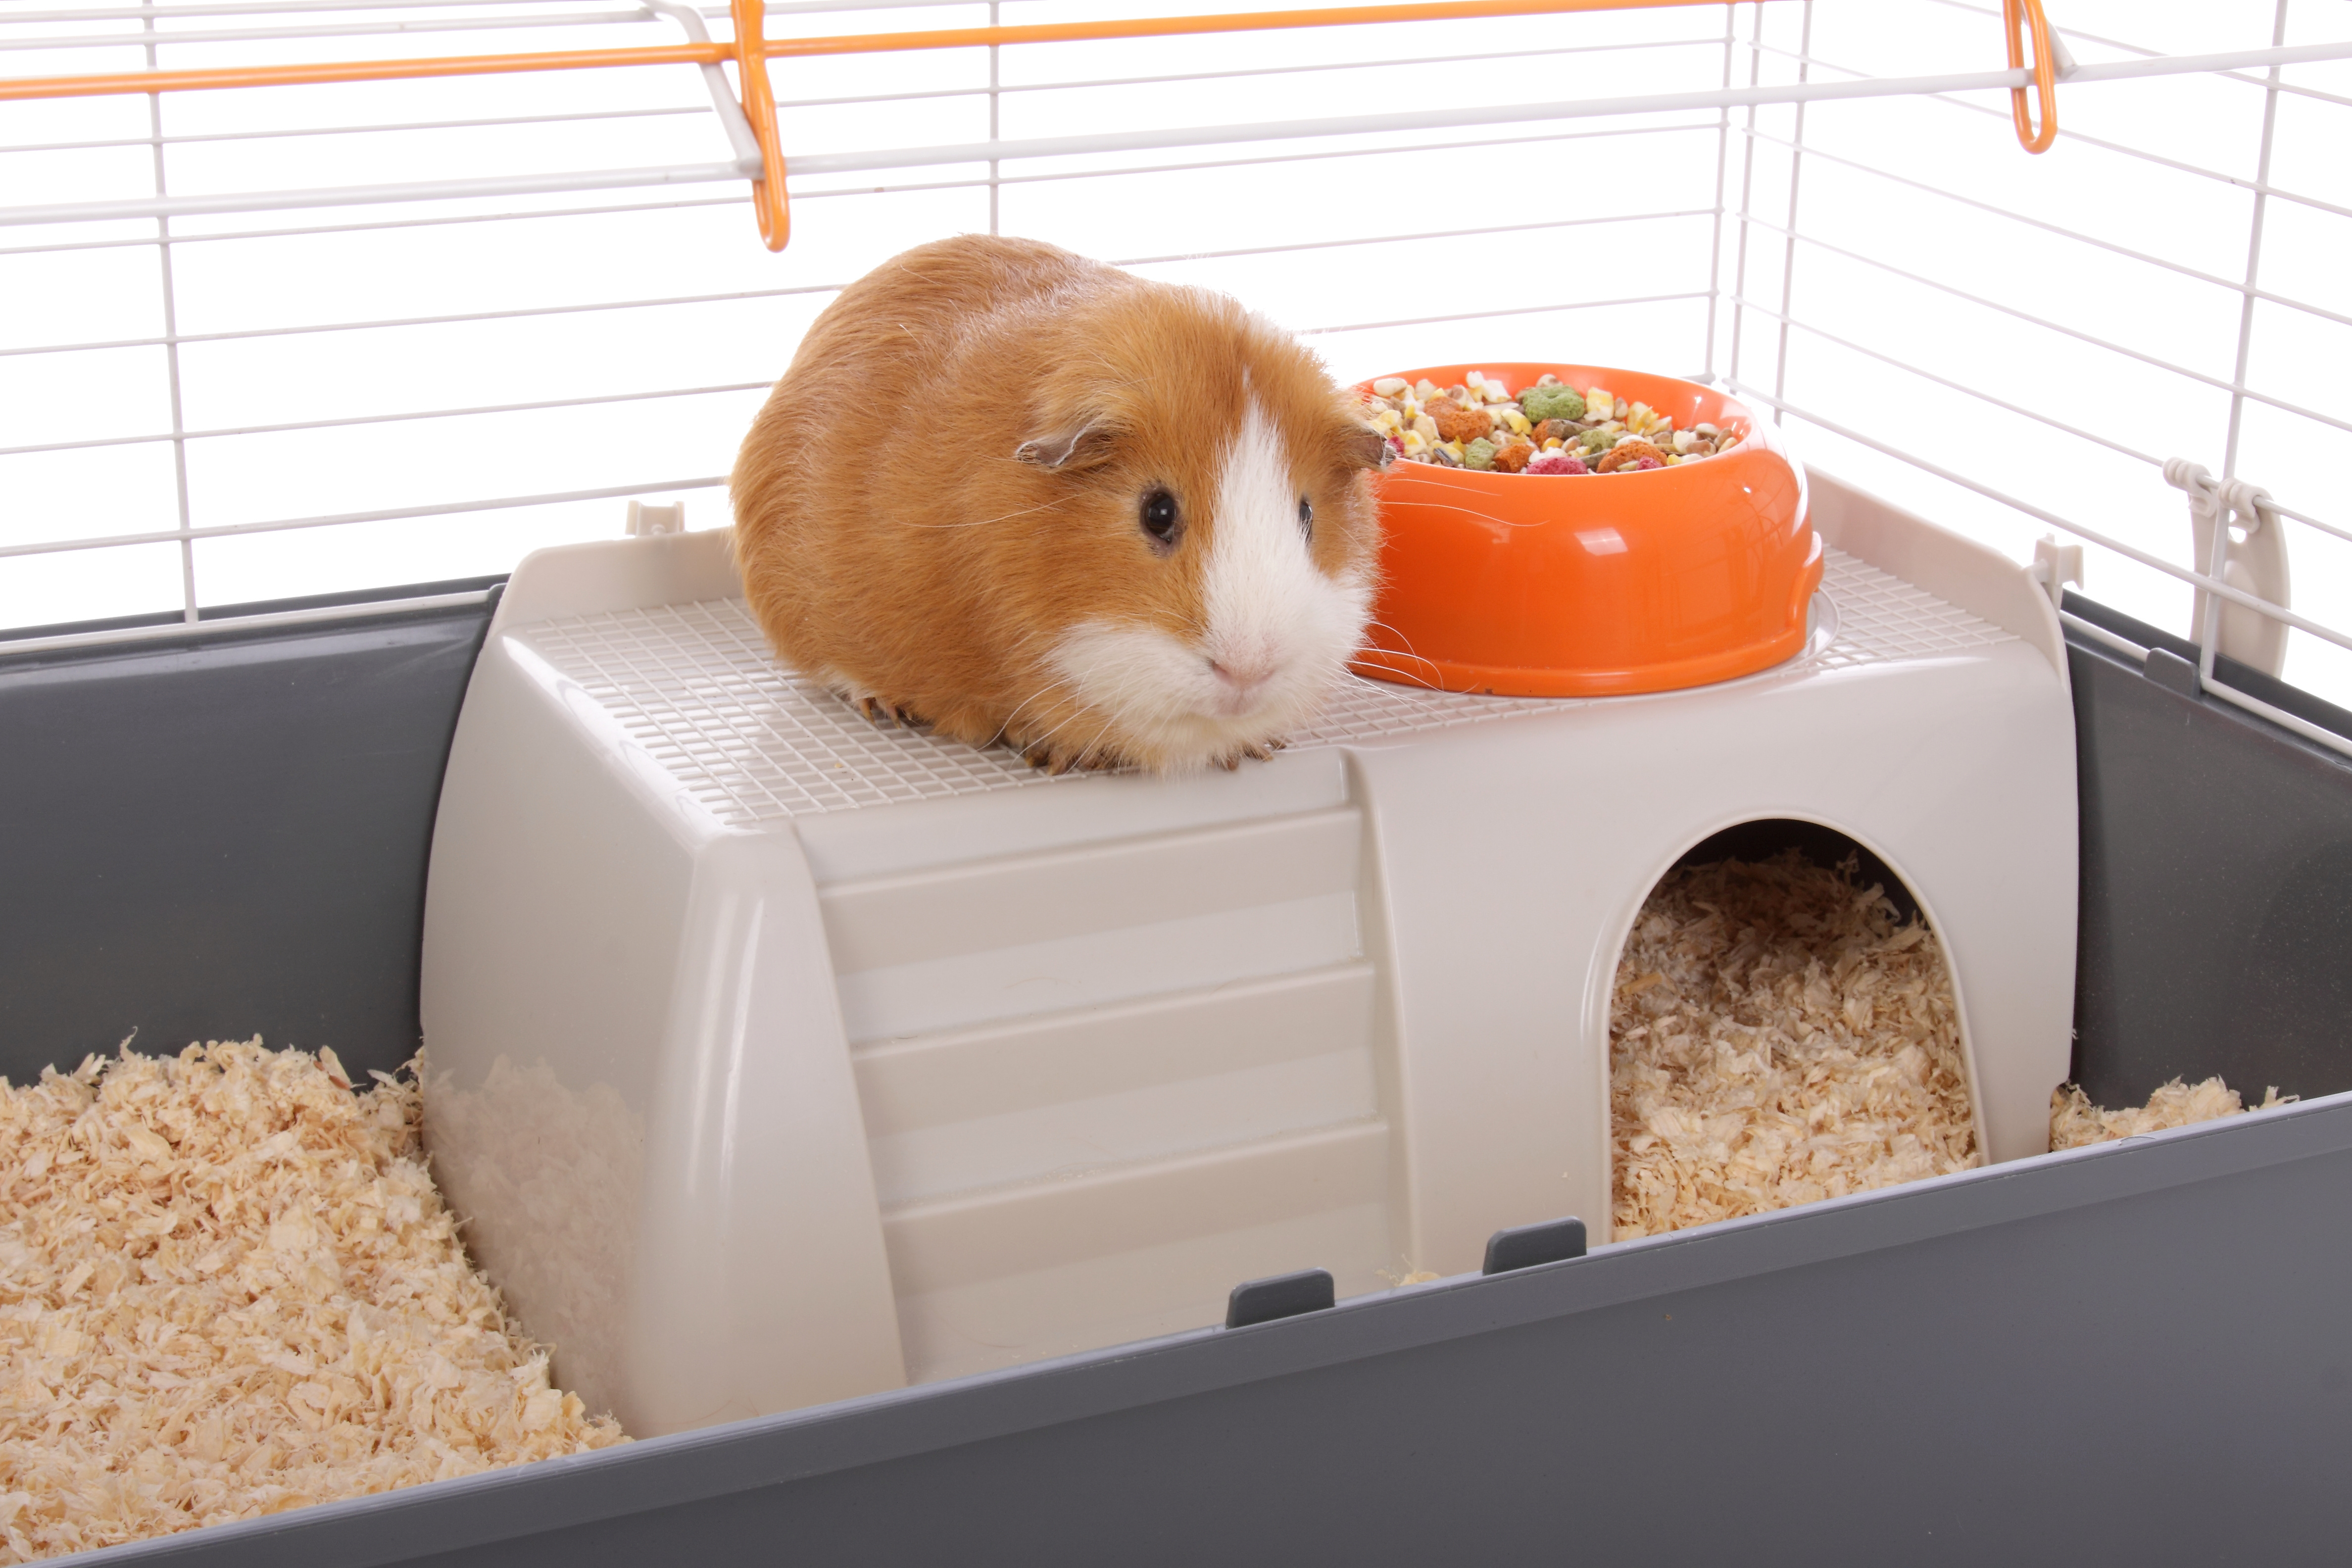 Why Guinea Pigs and Rabbits Are Not Starter Pets